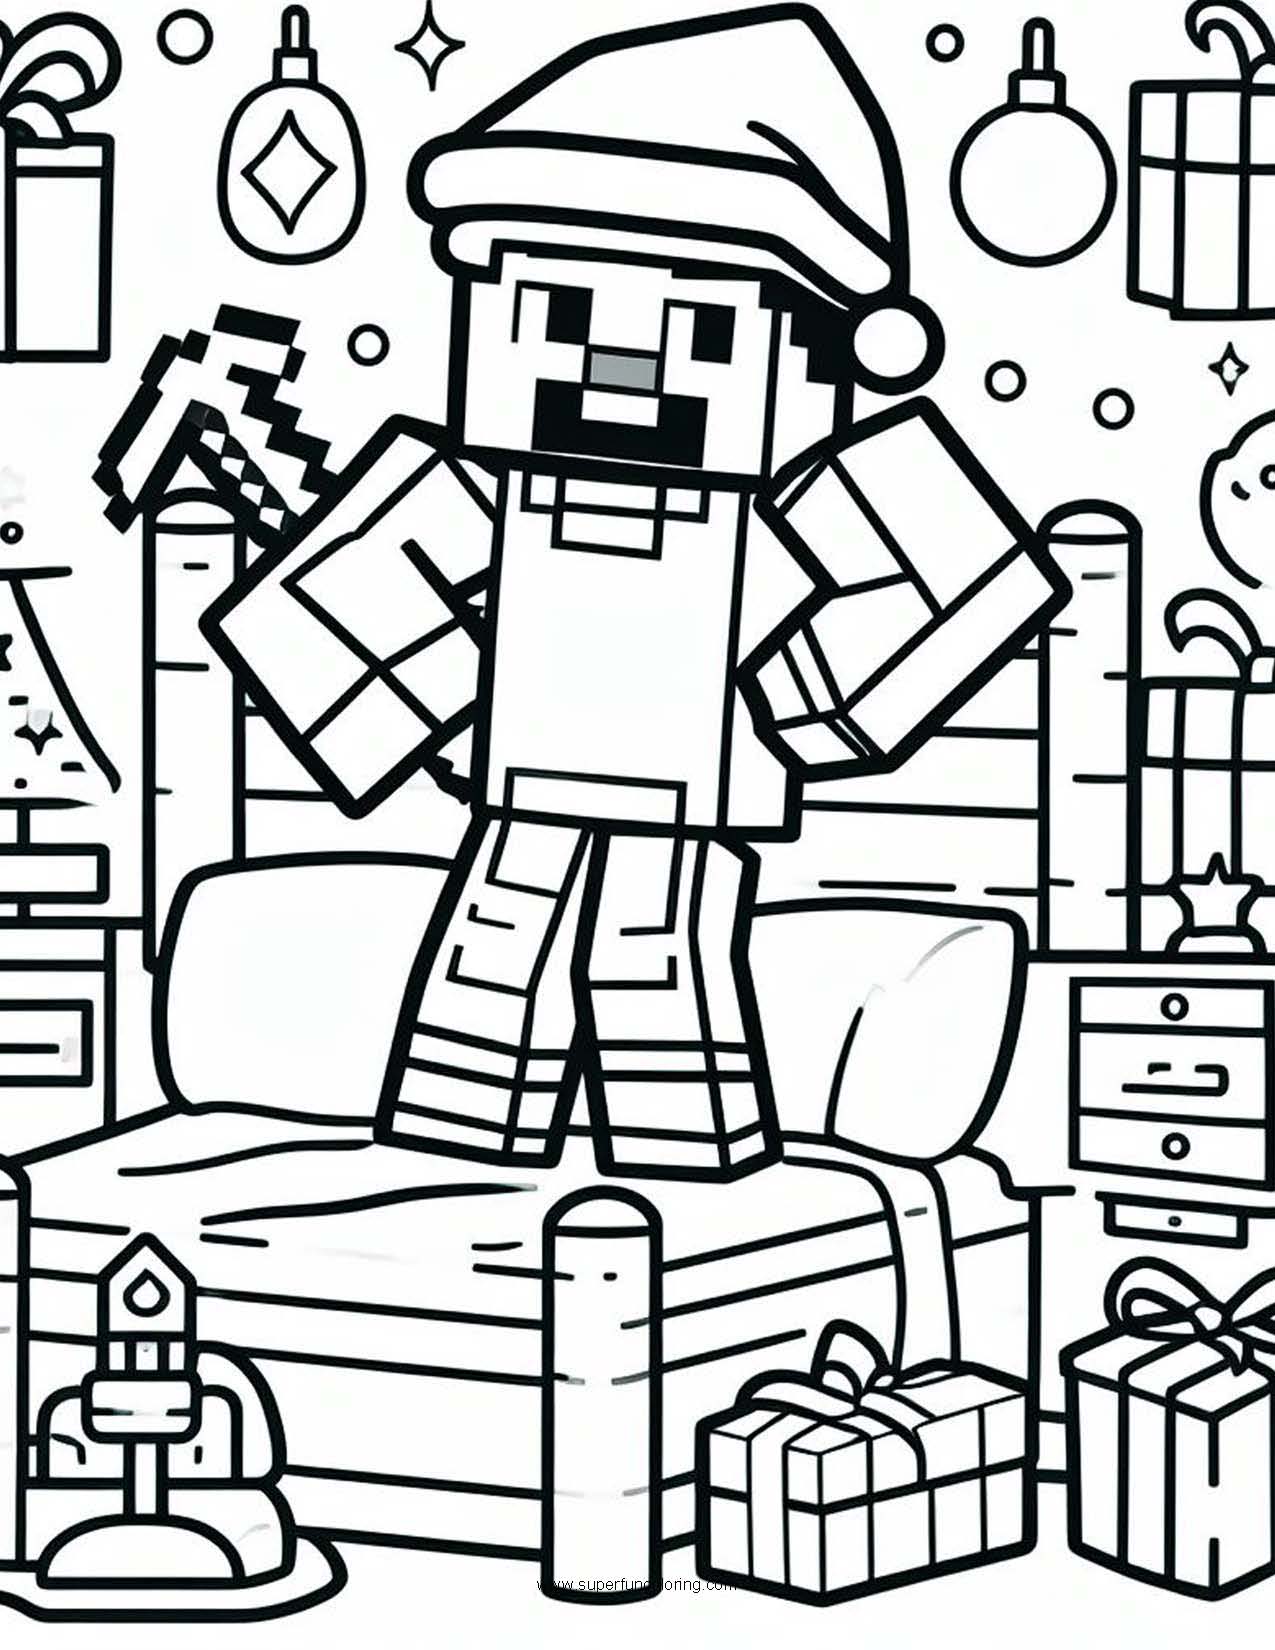 Minecraft christmas coloring page